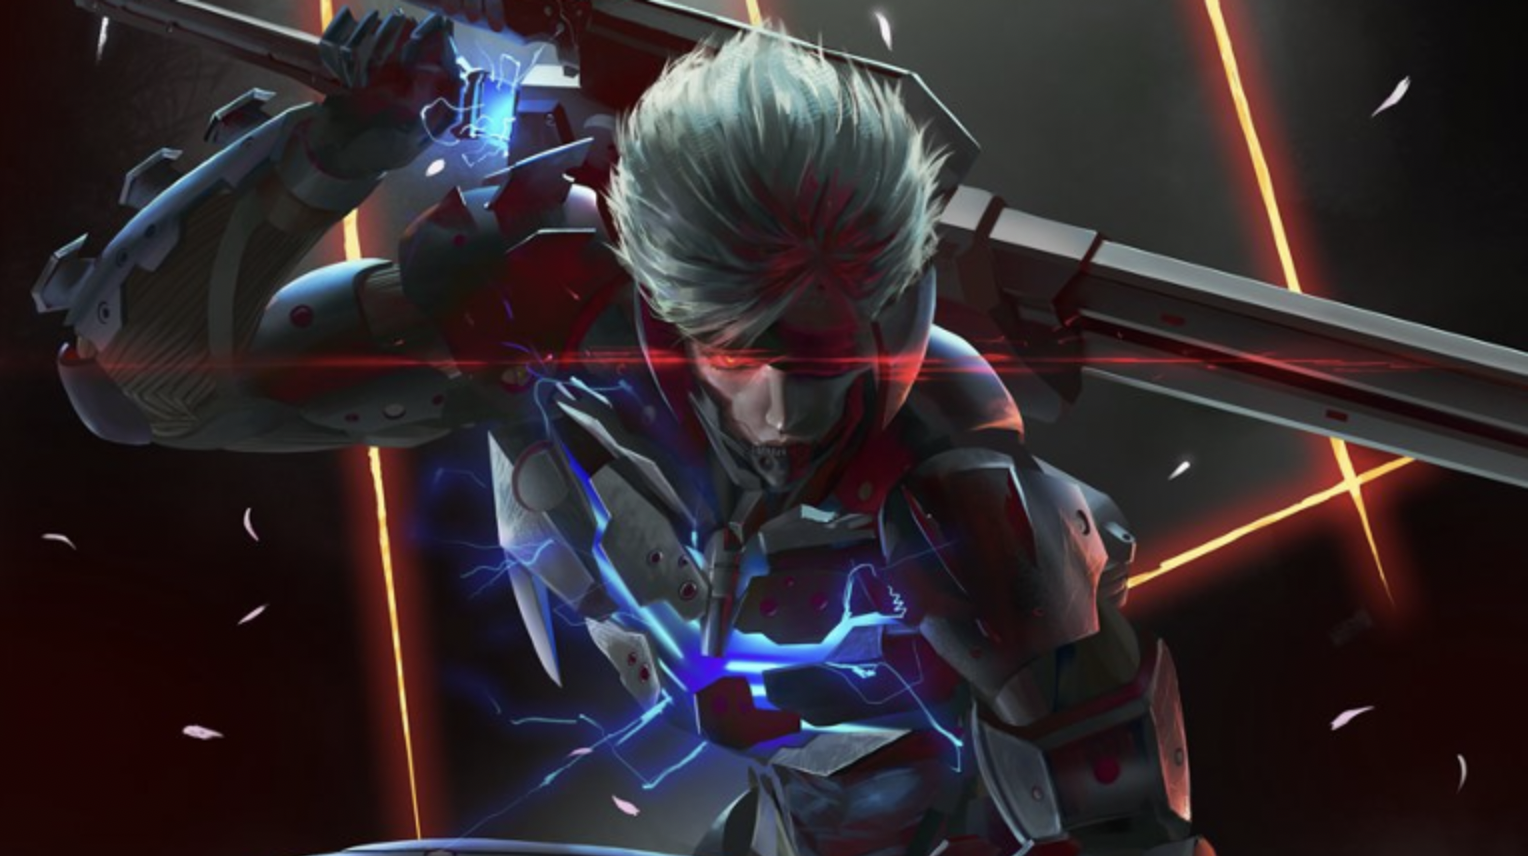 Celebrating 10 Years of METAL GEAR RISING: REVENGEANCE! Special message  from Director Saito.